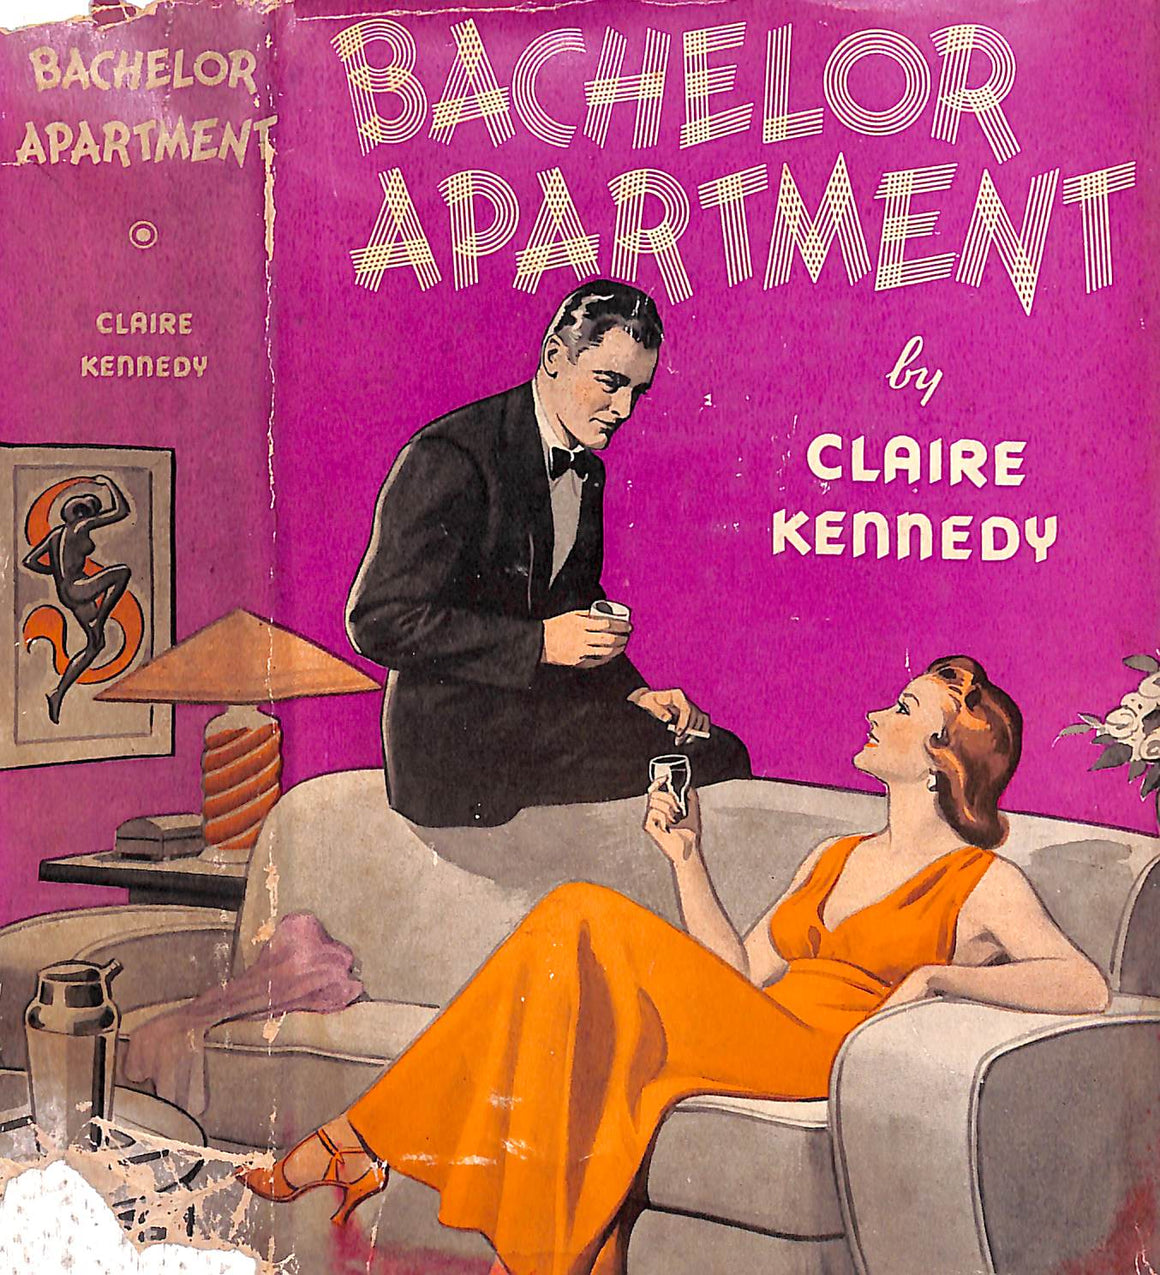 "Bachelor Apartment" 1938 KENNEDY, Claire